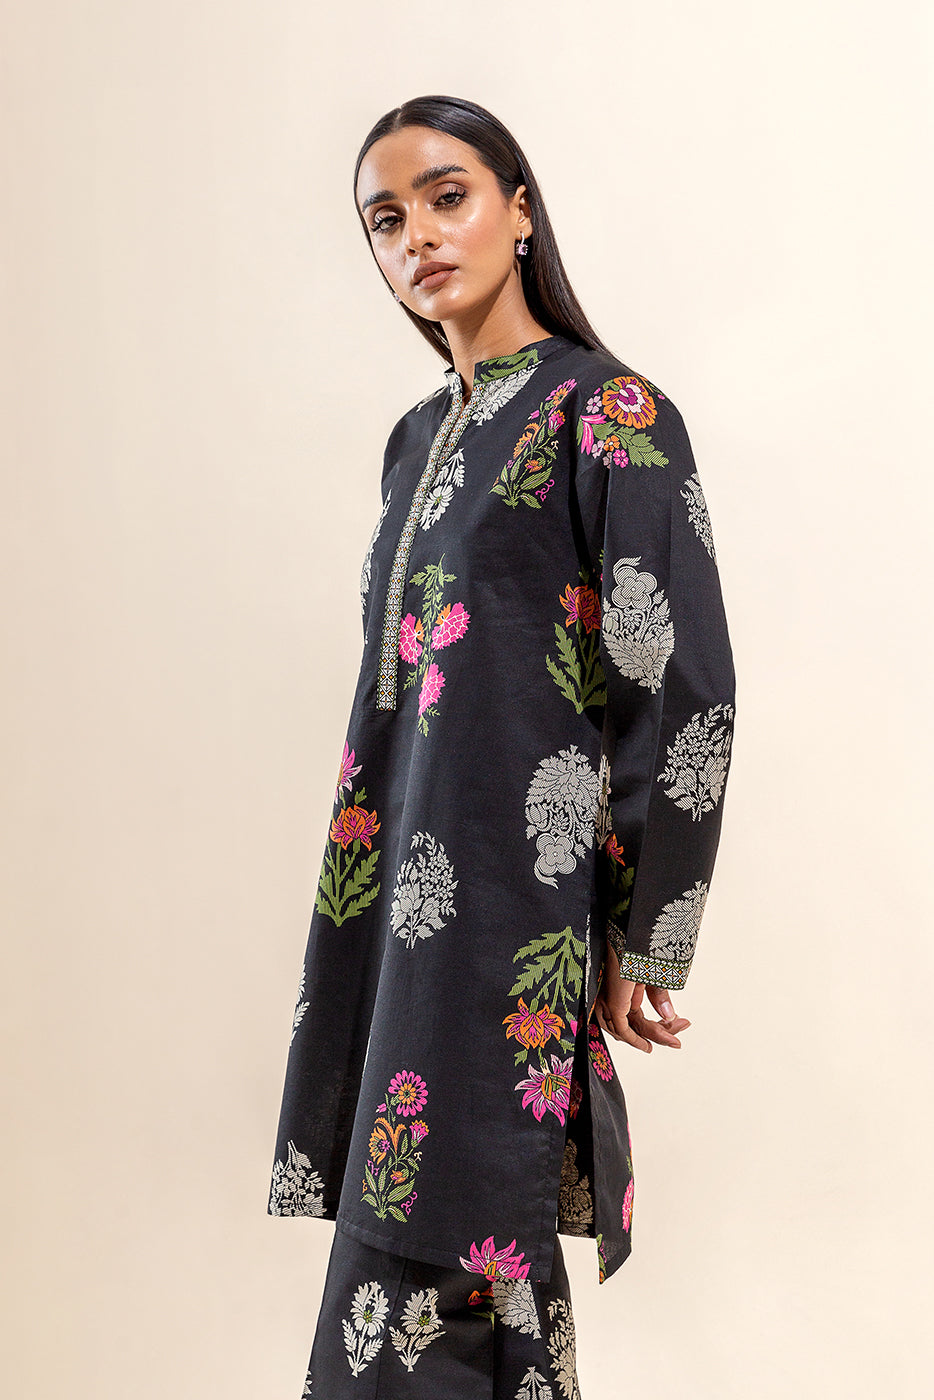 2 PIECE PRINTED LAWN SUIT-MIDNIGHT BLOSSOM (UNSTITCHED) - BEECHTREE